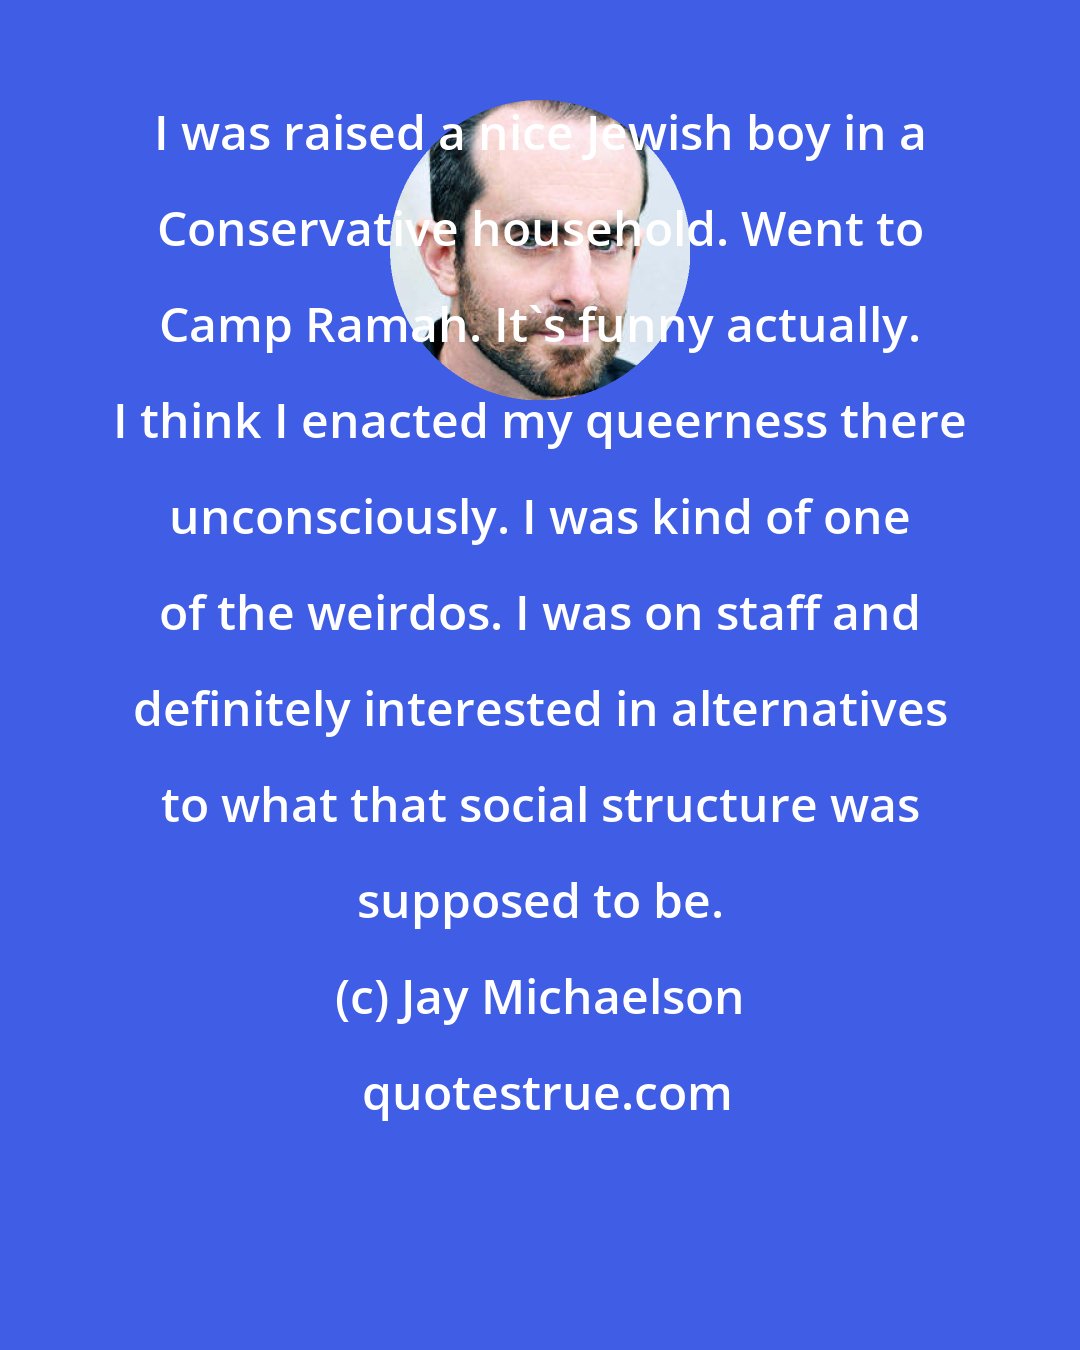 Jay Michaelson: I was raised a nice Jewish boy in a Conservative household. Went to Camp Ramah. It's funny actually. I think I enacted my queerness there unconsciously. I was kind of one of the weirdos. I was on staff and definitely interested in alternatives to what that social structure was supposed to be.